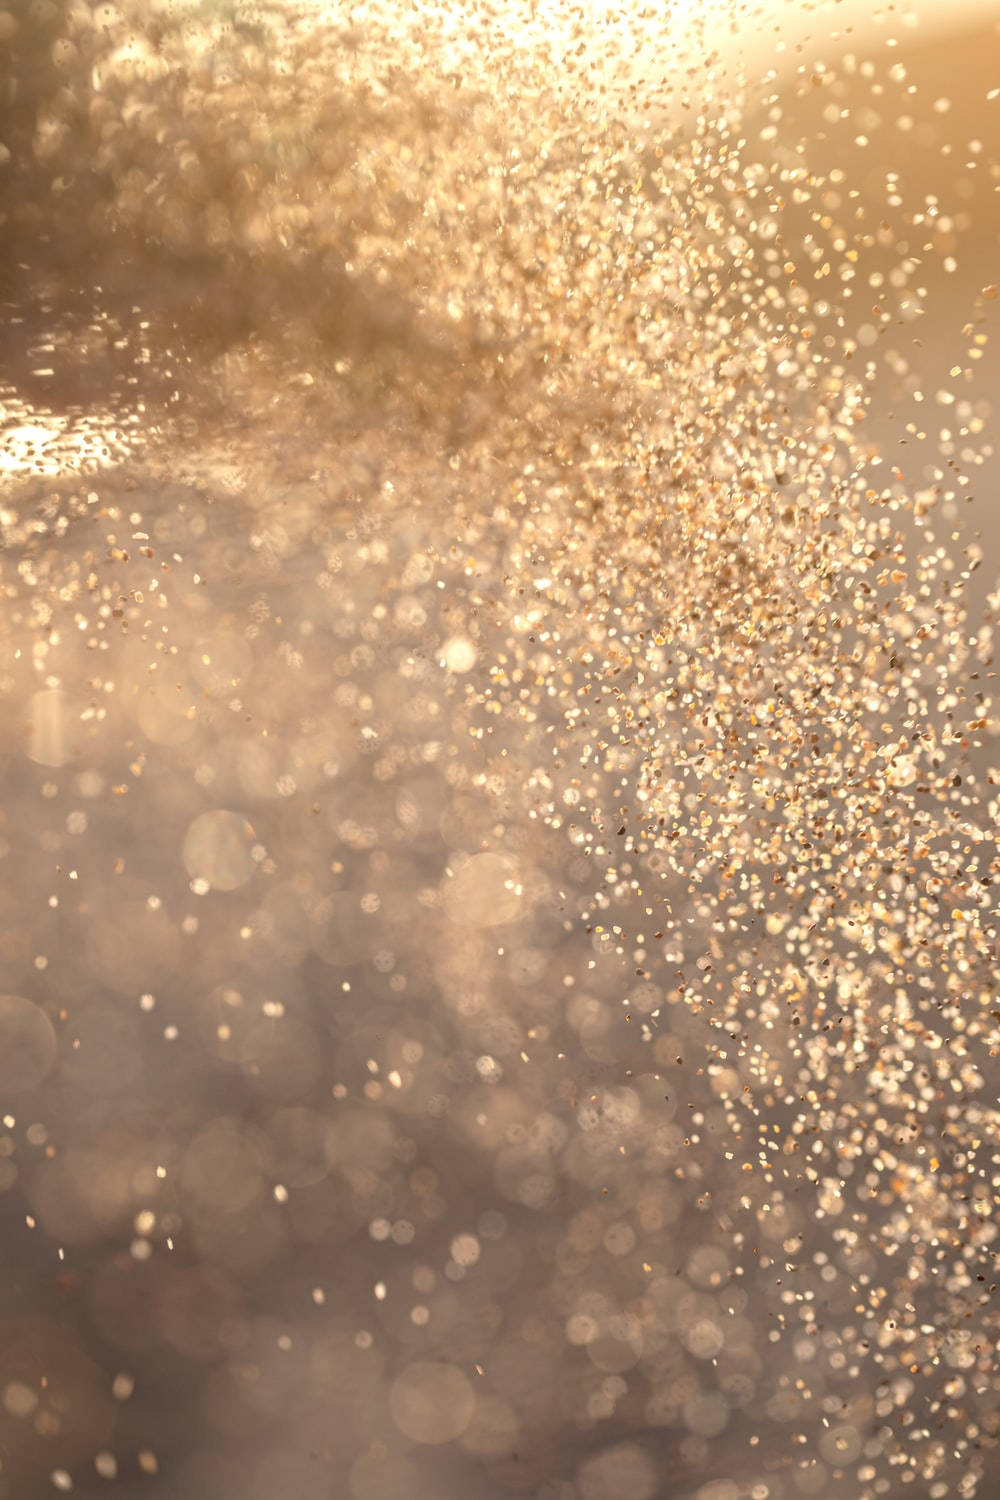 Falling Sparkly Gold Glitters Wallpaper